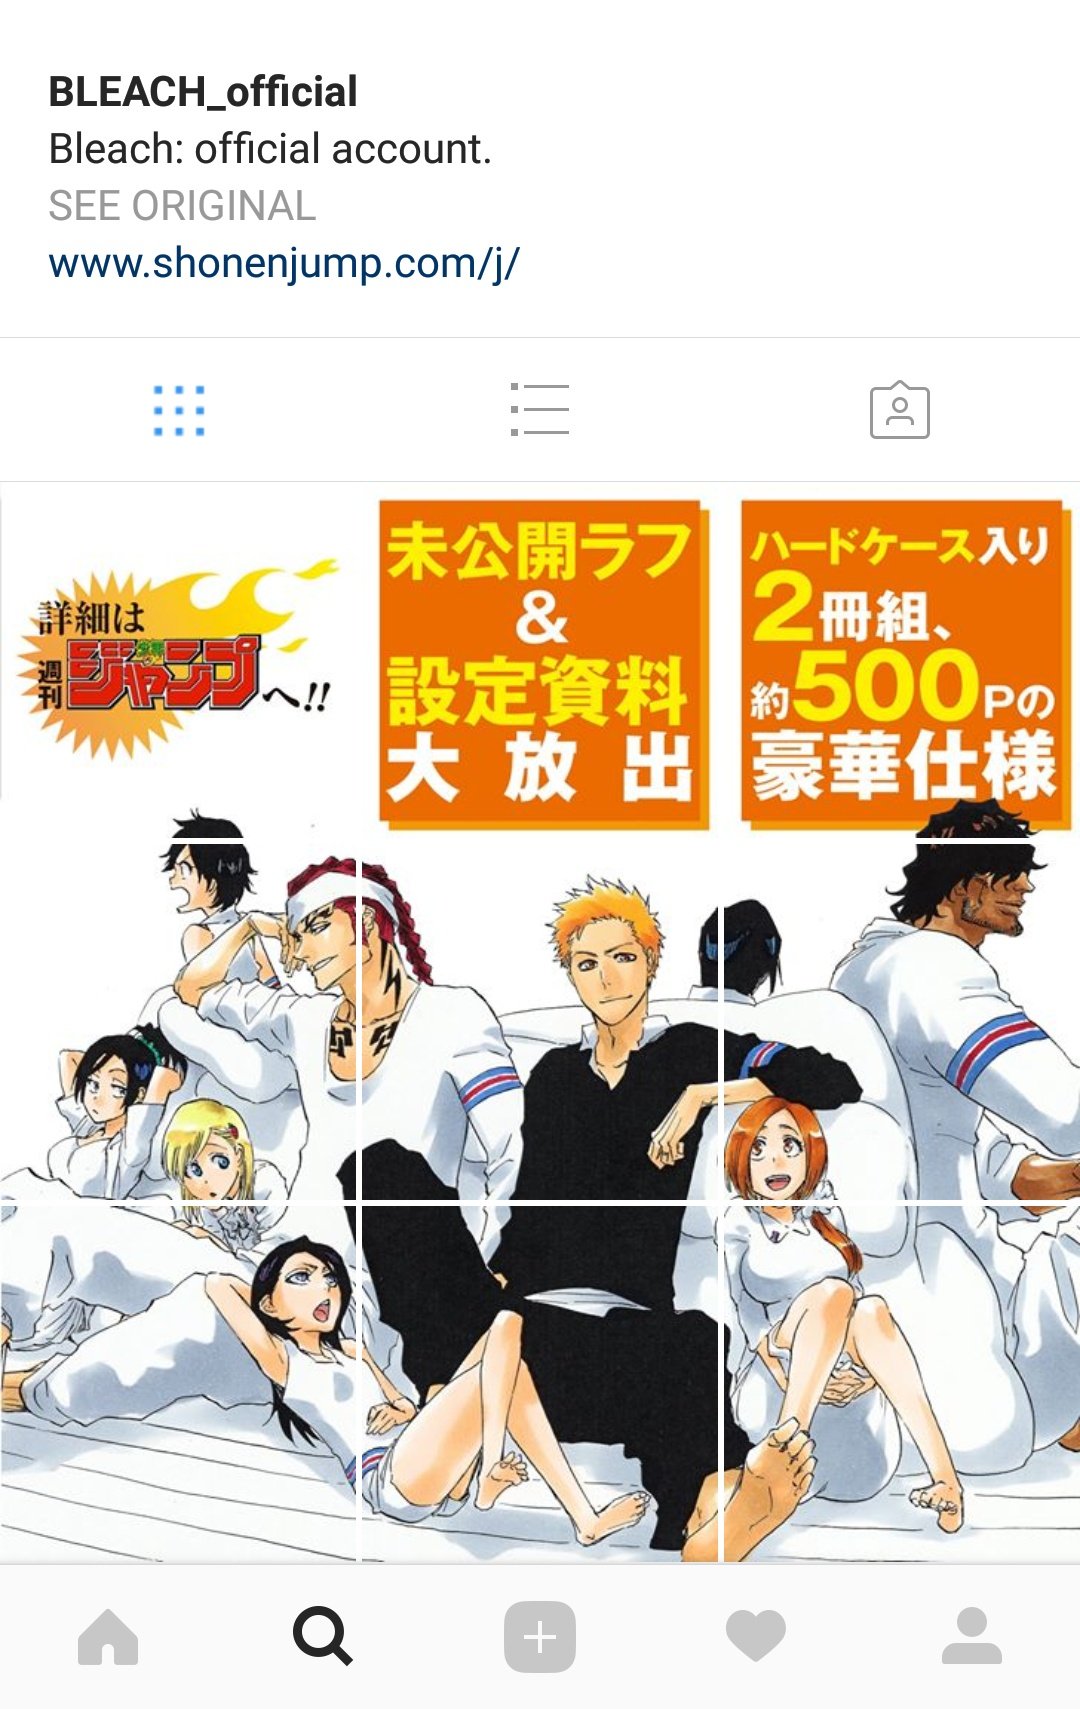 Manganimy Somewhat Returned On Twitter Bleach Artbook Jet The Complete Package Of 15 Years Of Bleach Is Now Here More Than 700 Pieces Of All The Artworks Created Over 15 Years Of